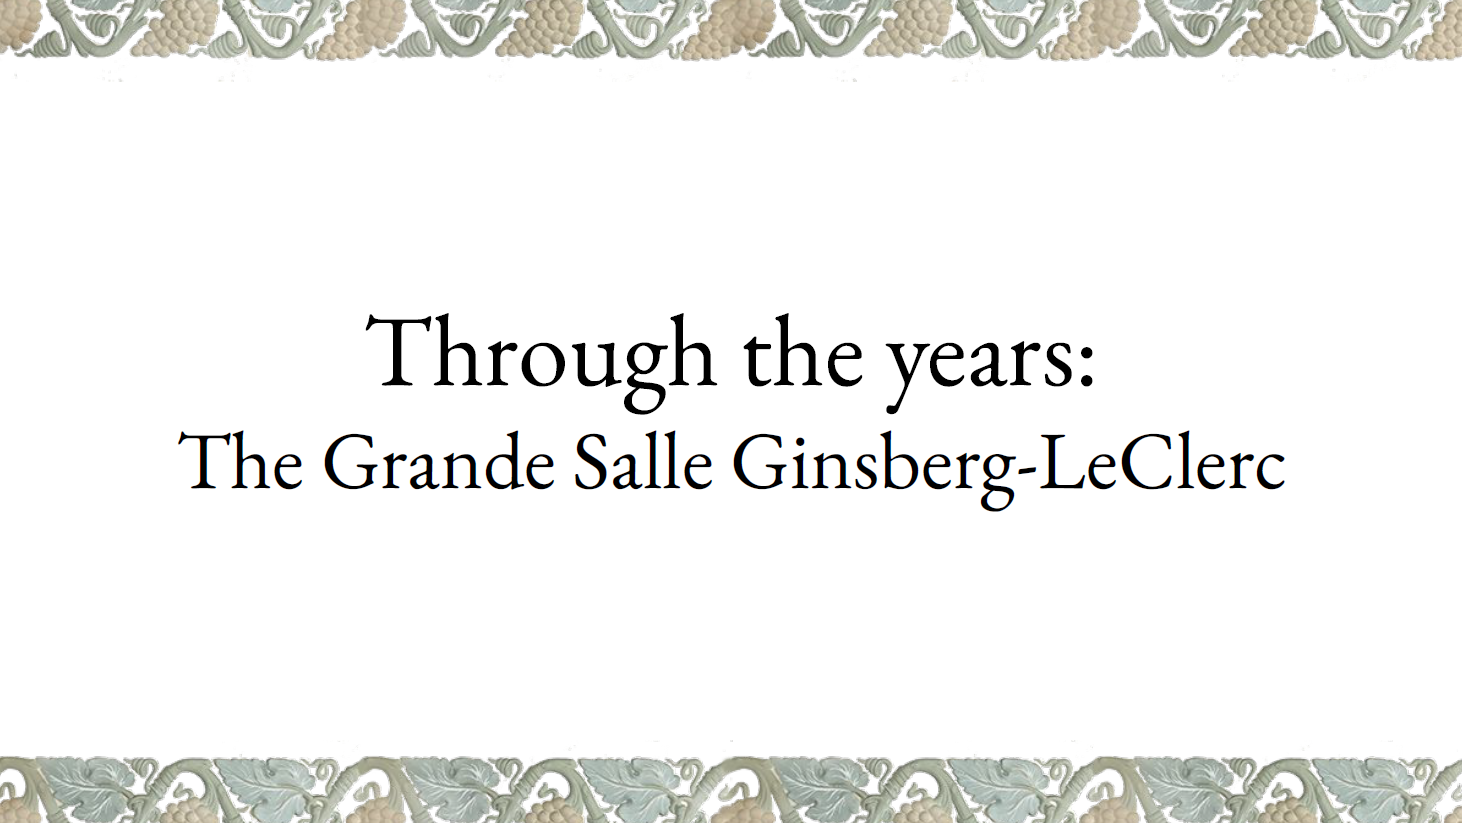 Through the years: The Grande Salle Ginsberg-LeClerc